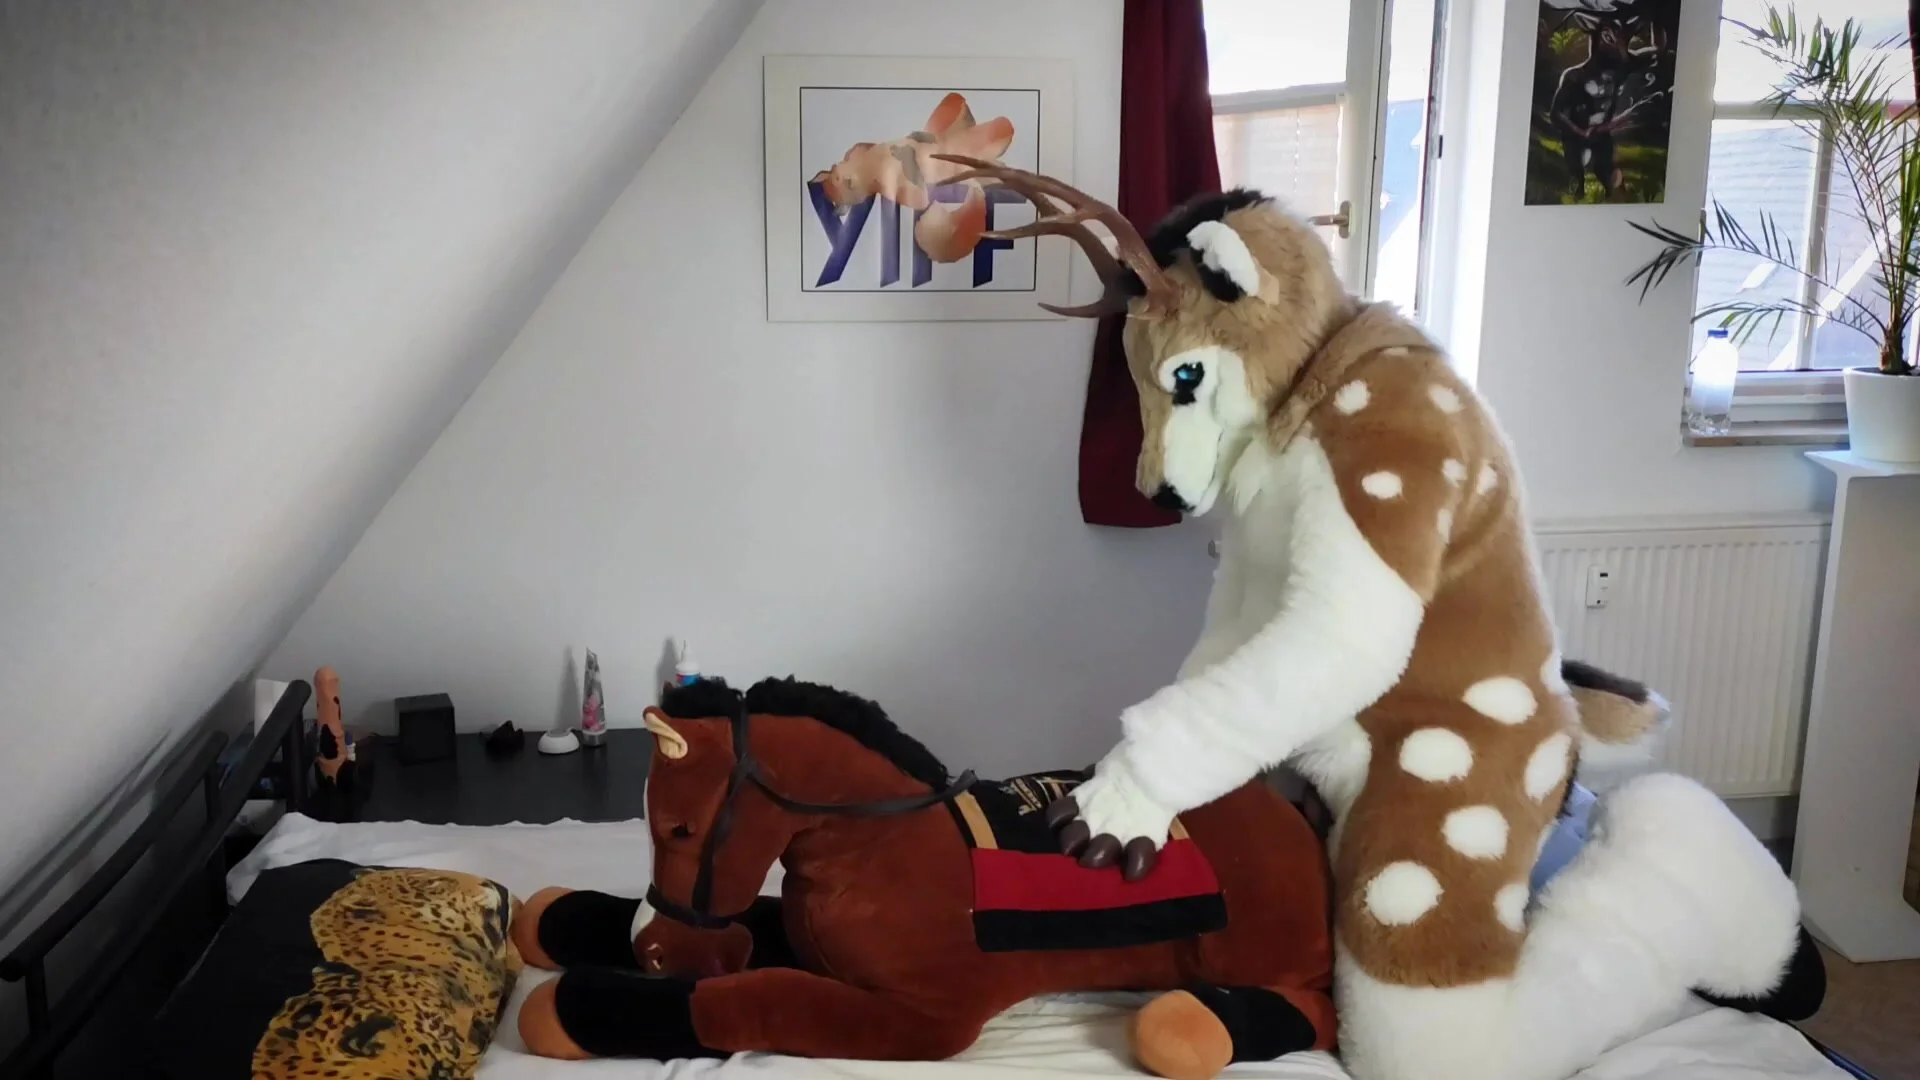 Girl Drinks Her Horse Piss And Cum - Deer fursuiter pissing and cumming on plush horse - ThisVid.com